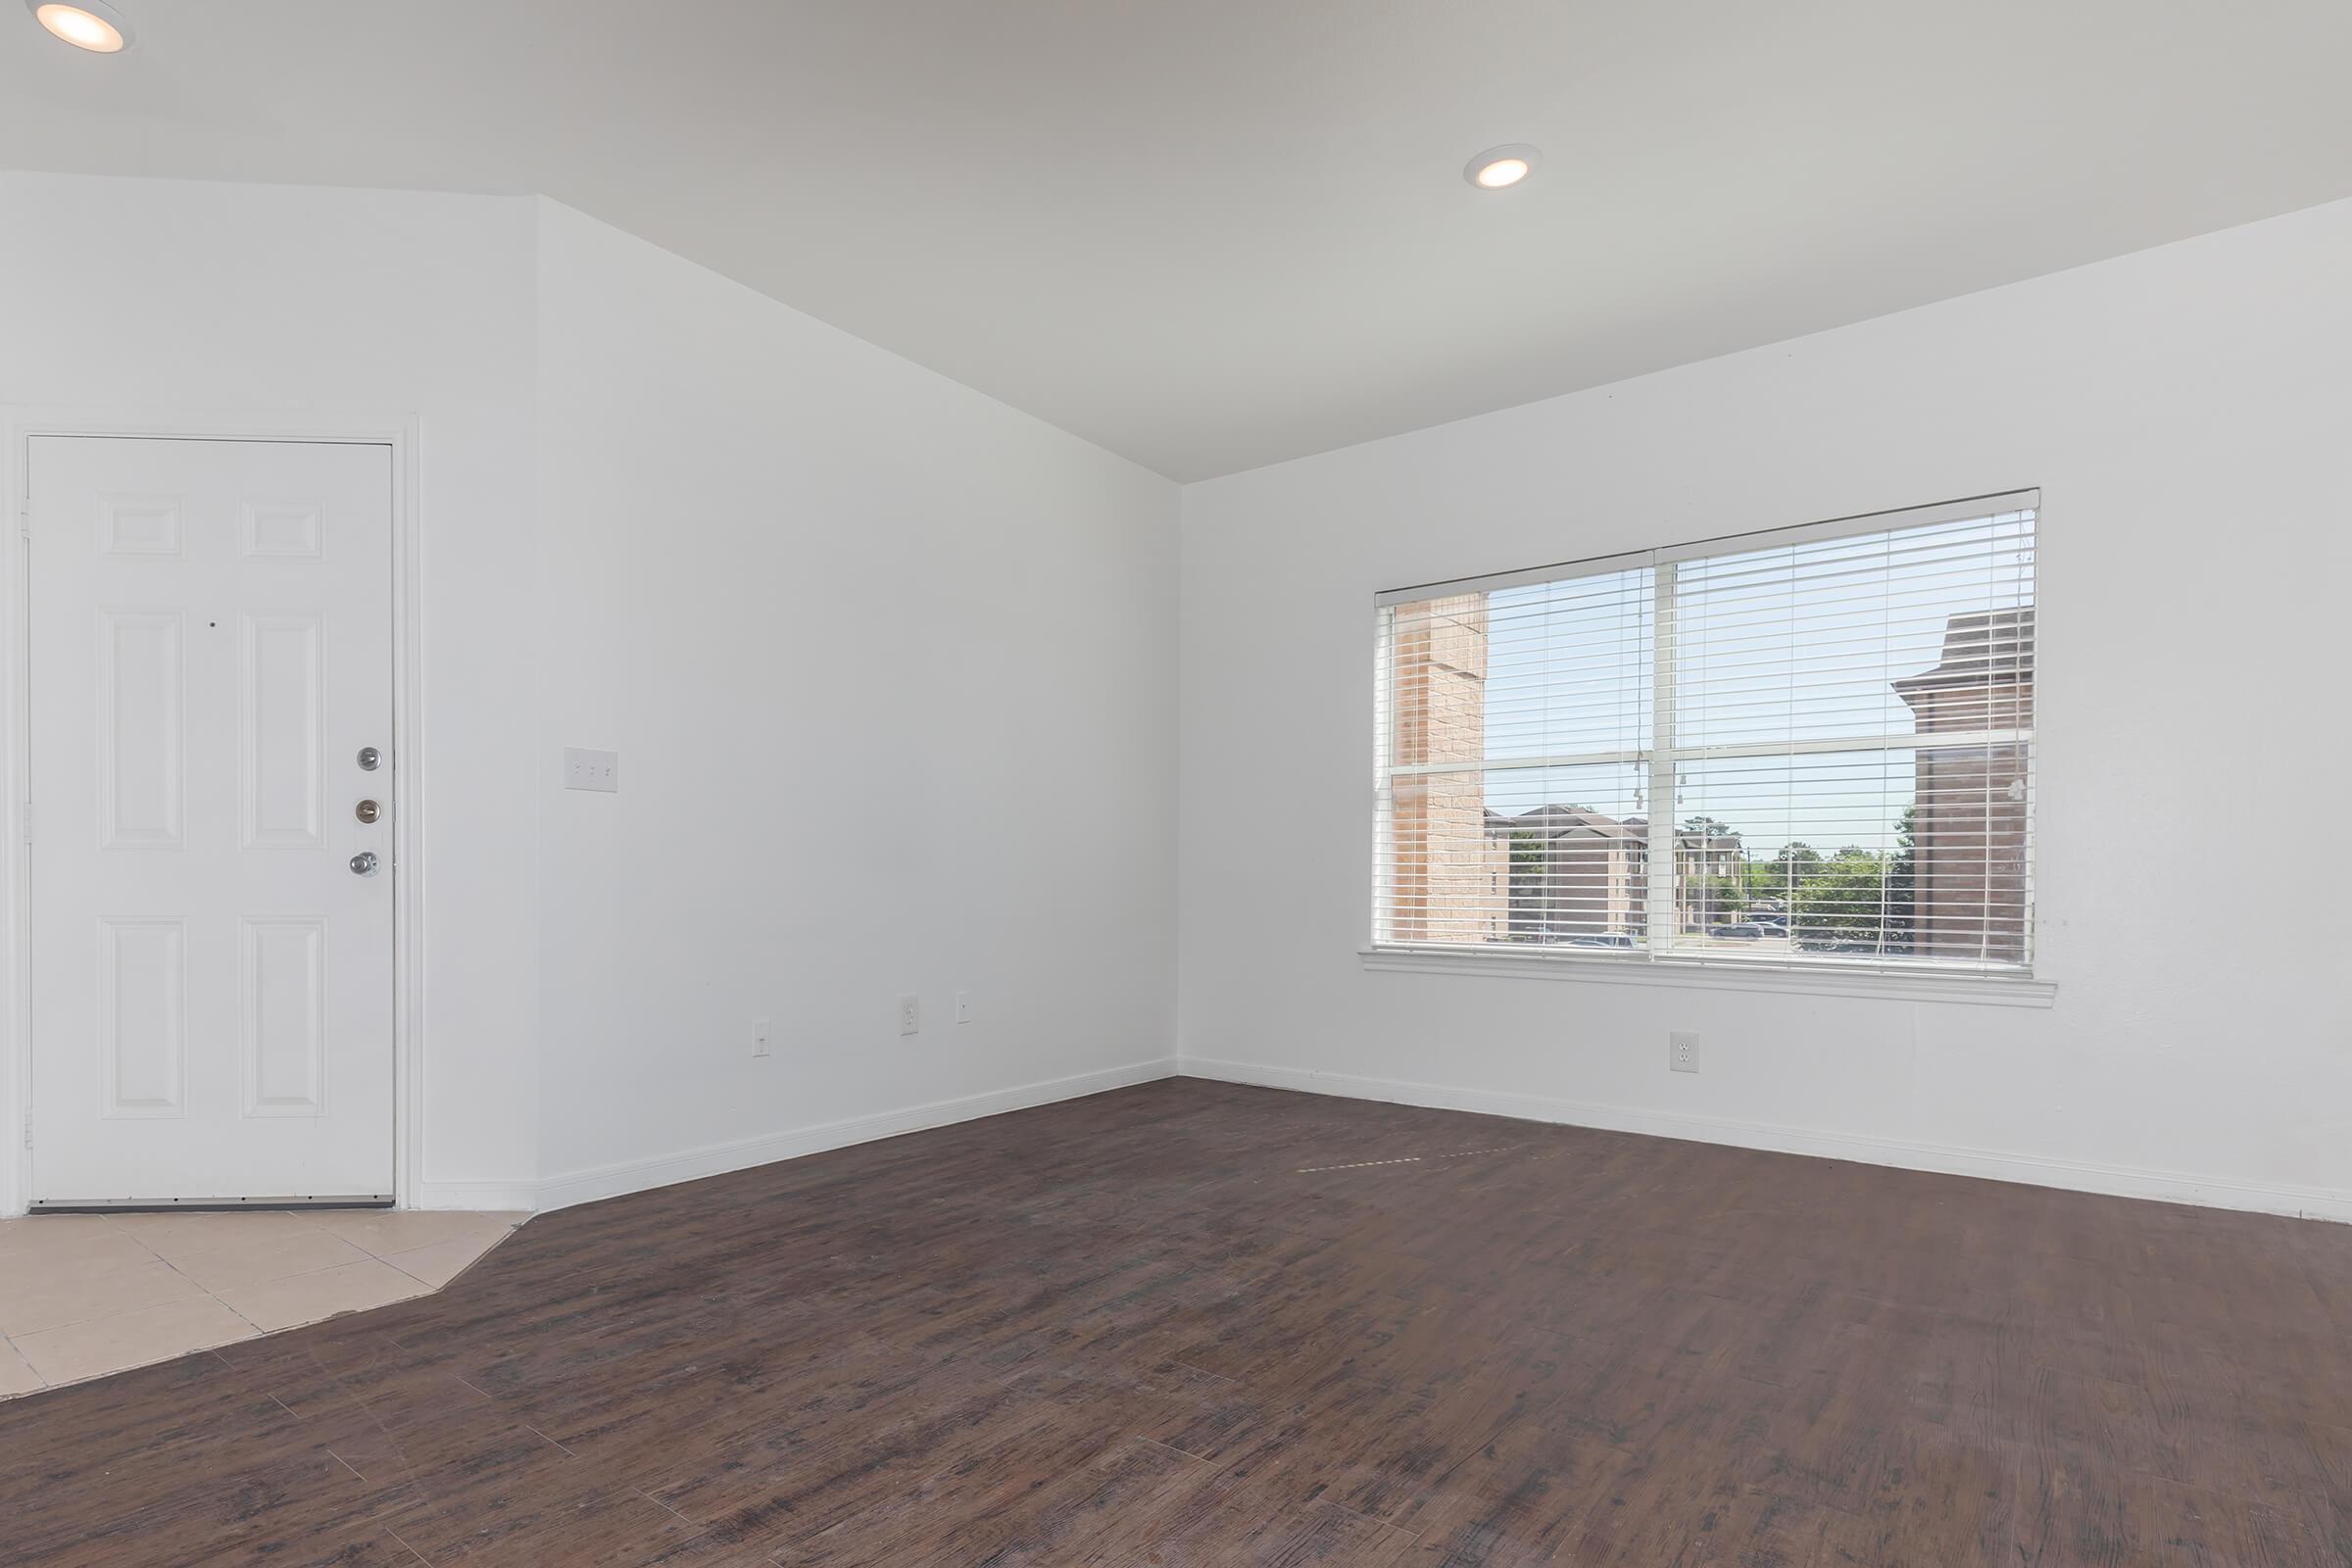 THREE BEDROOM APARTMENTS FOR RENT IN HOUSTON